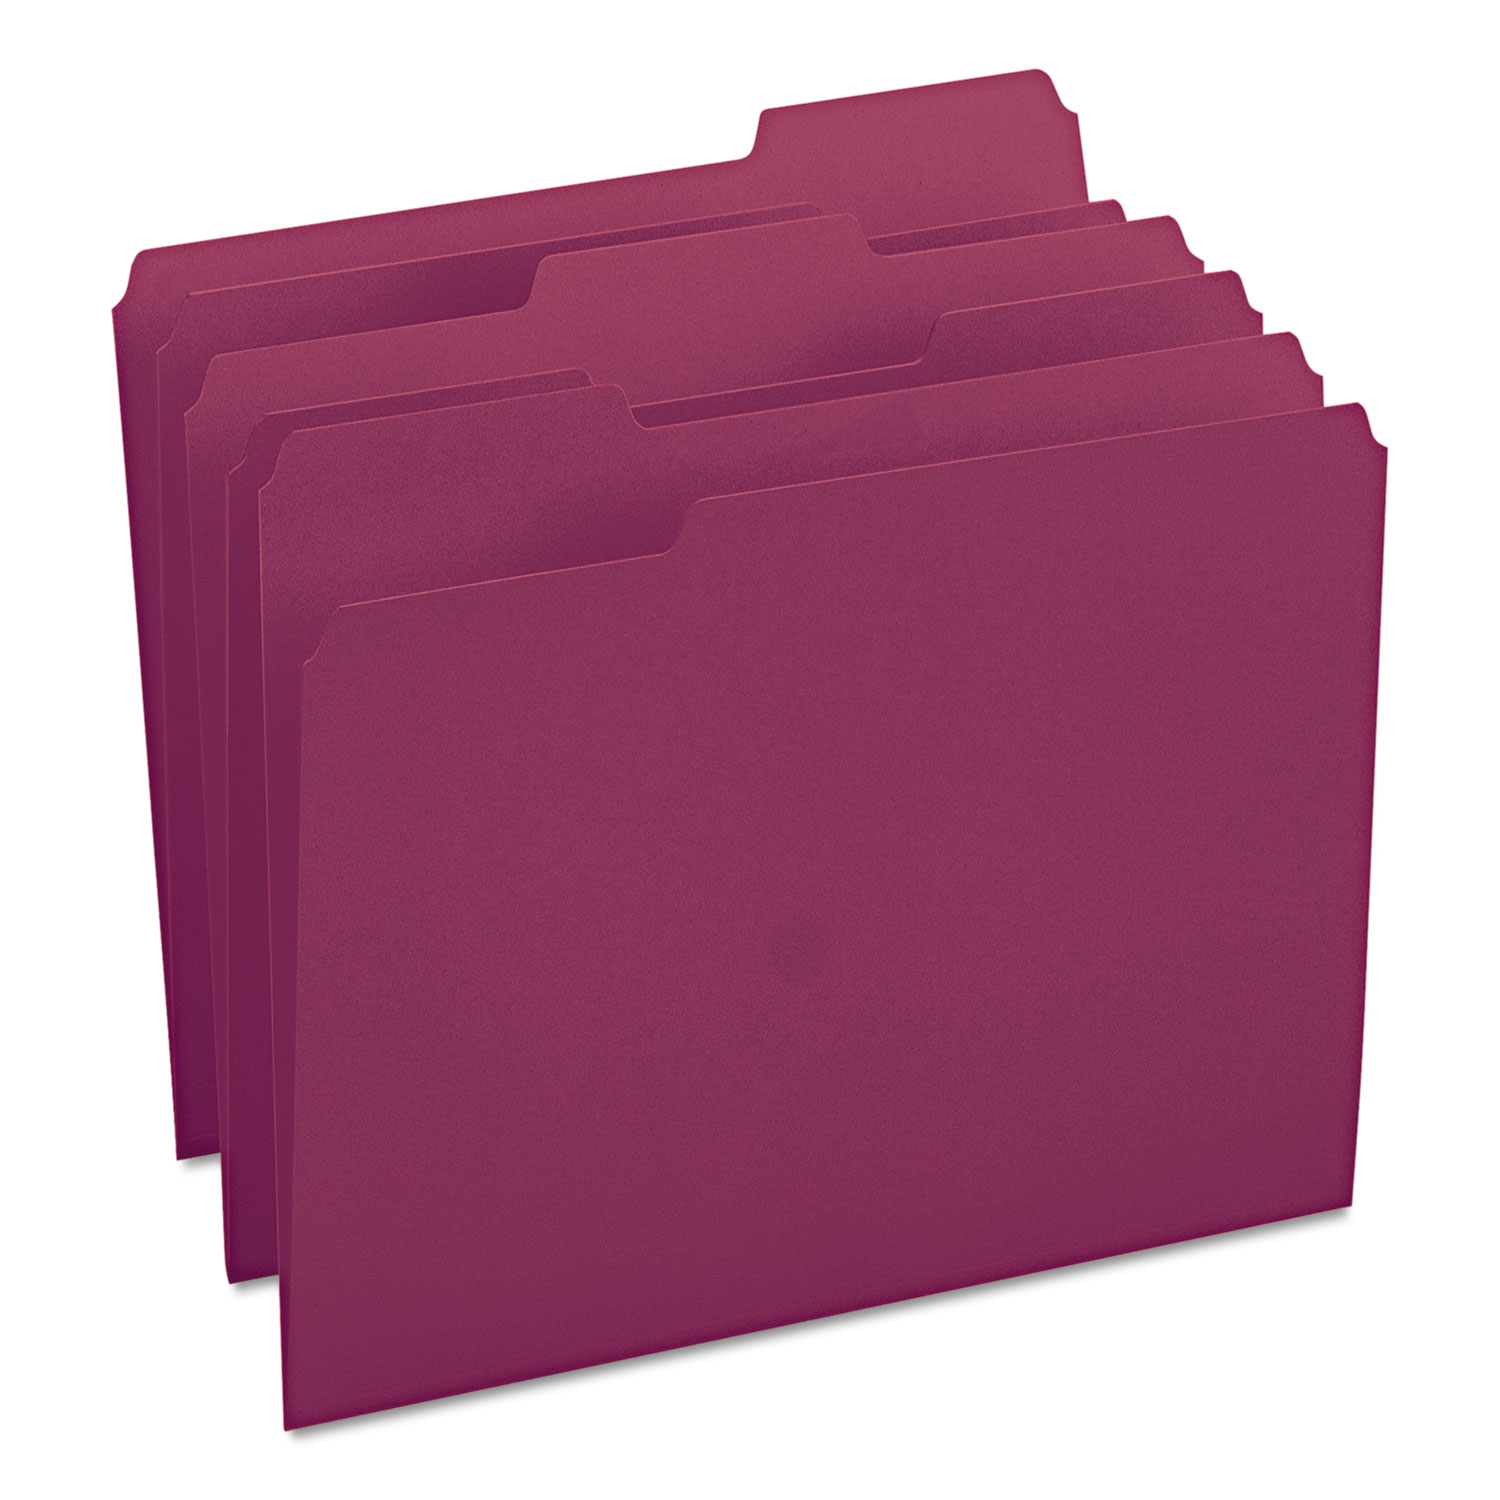  Smead 13093 Colored File Folders, 1/3-Cut Tabs, Letter Size, Maroon, 100/Box (SMD13093) 